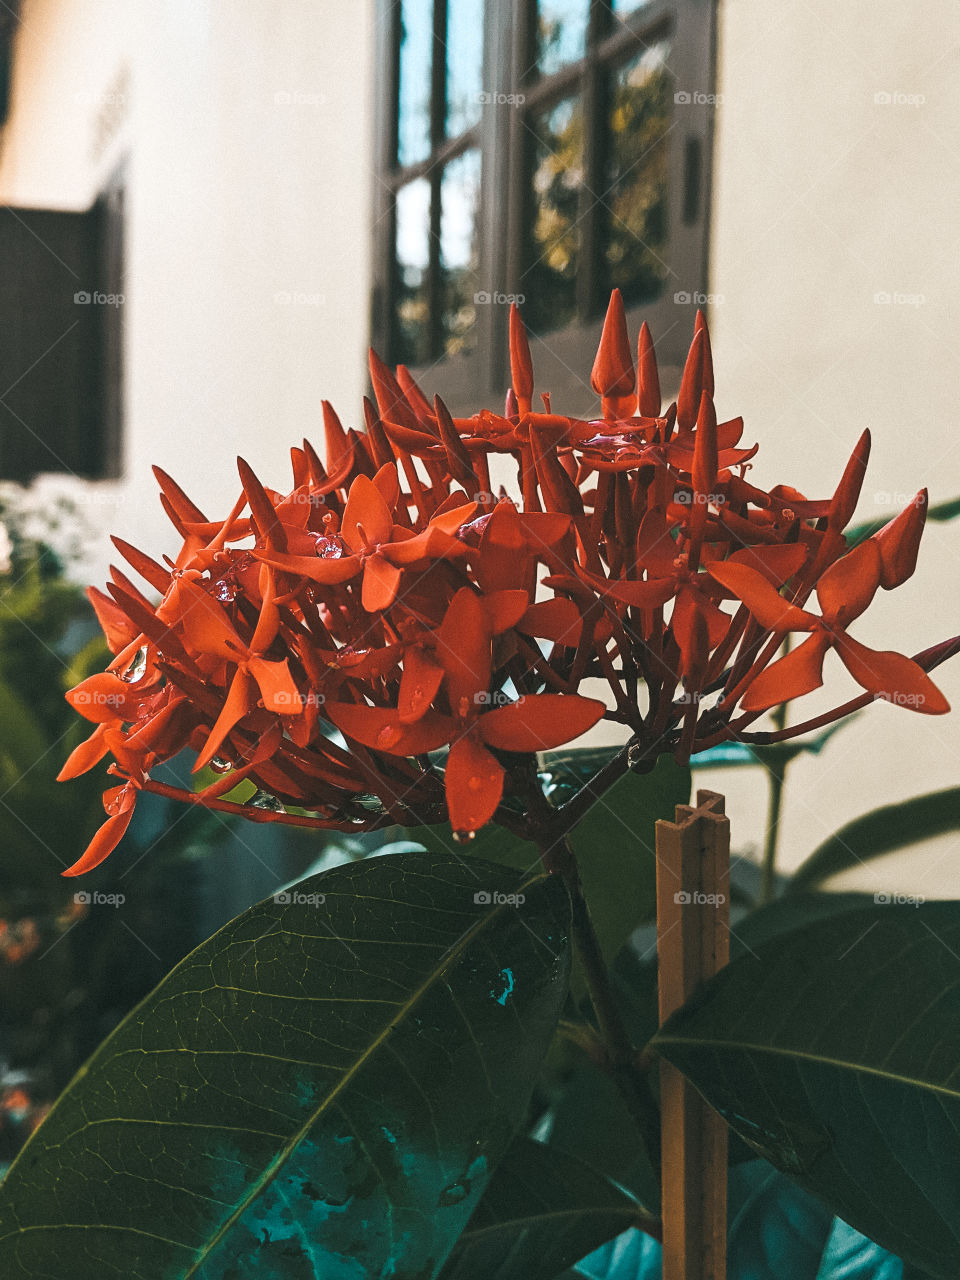 Red flowers that adorn the garden of the house